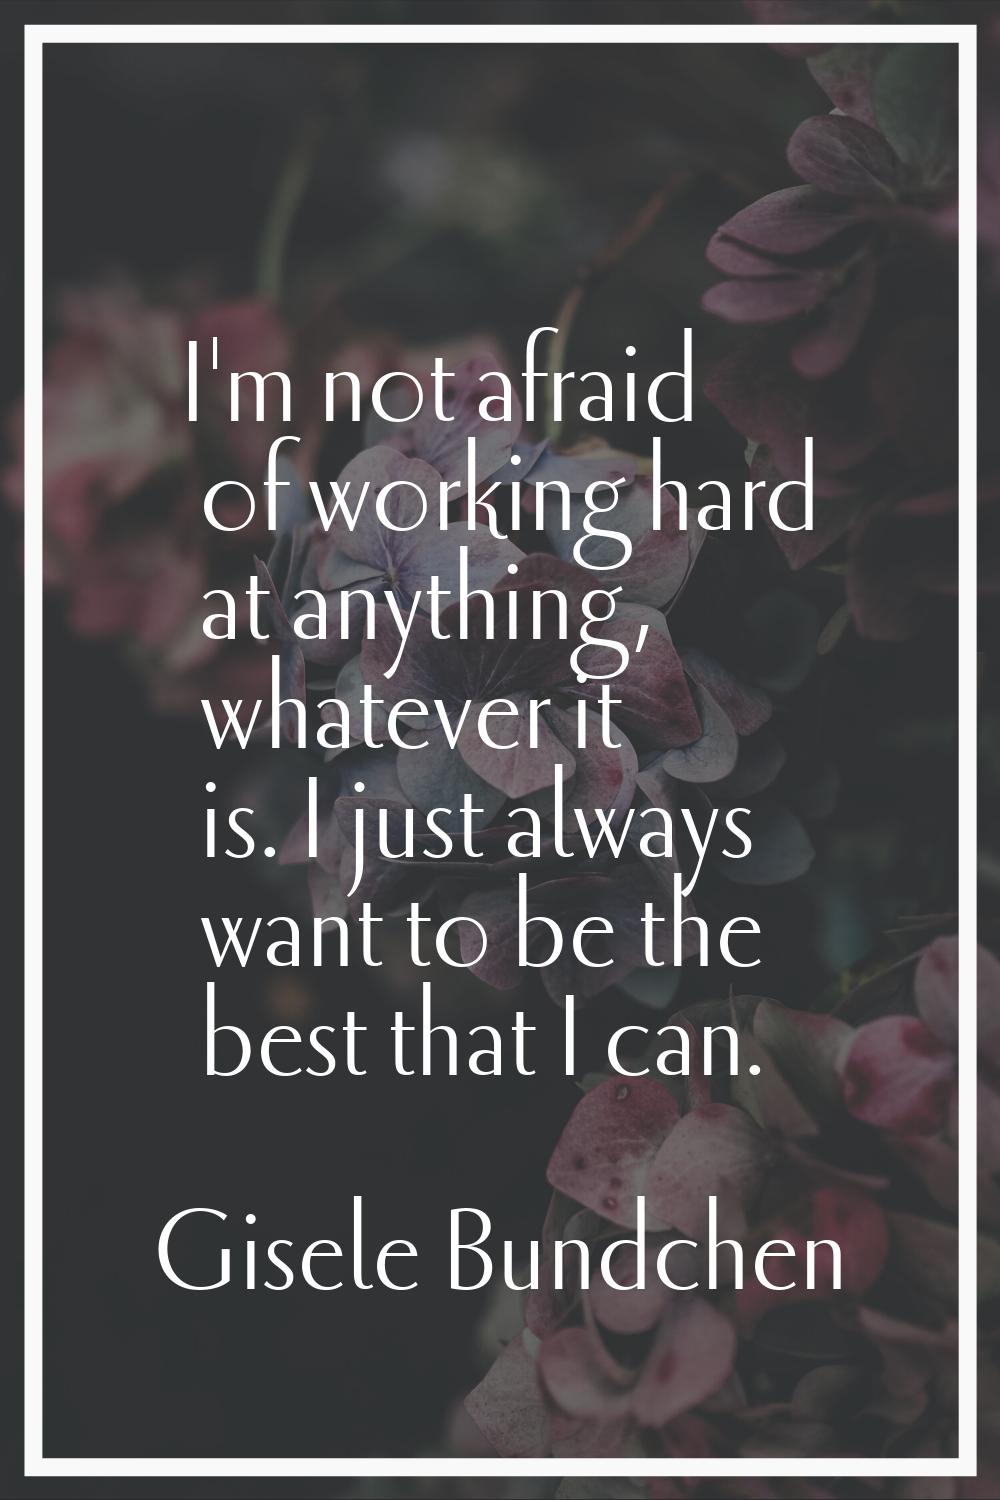 I'm not afraid of working hard at anything, whatever it is. I just always want to be the best that 